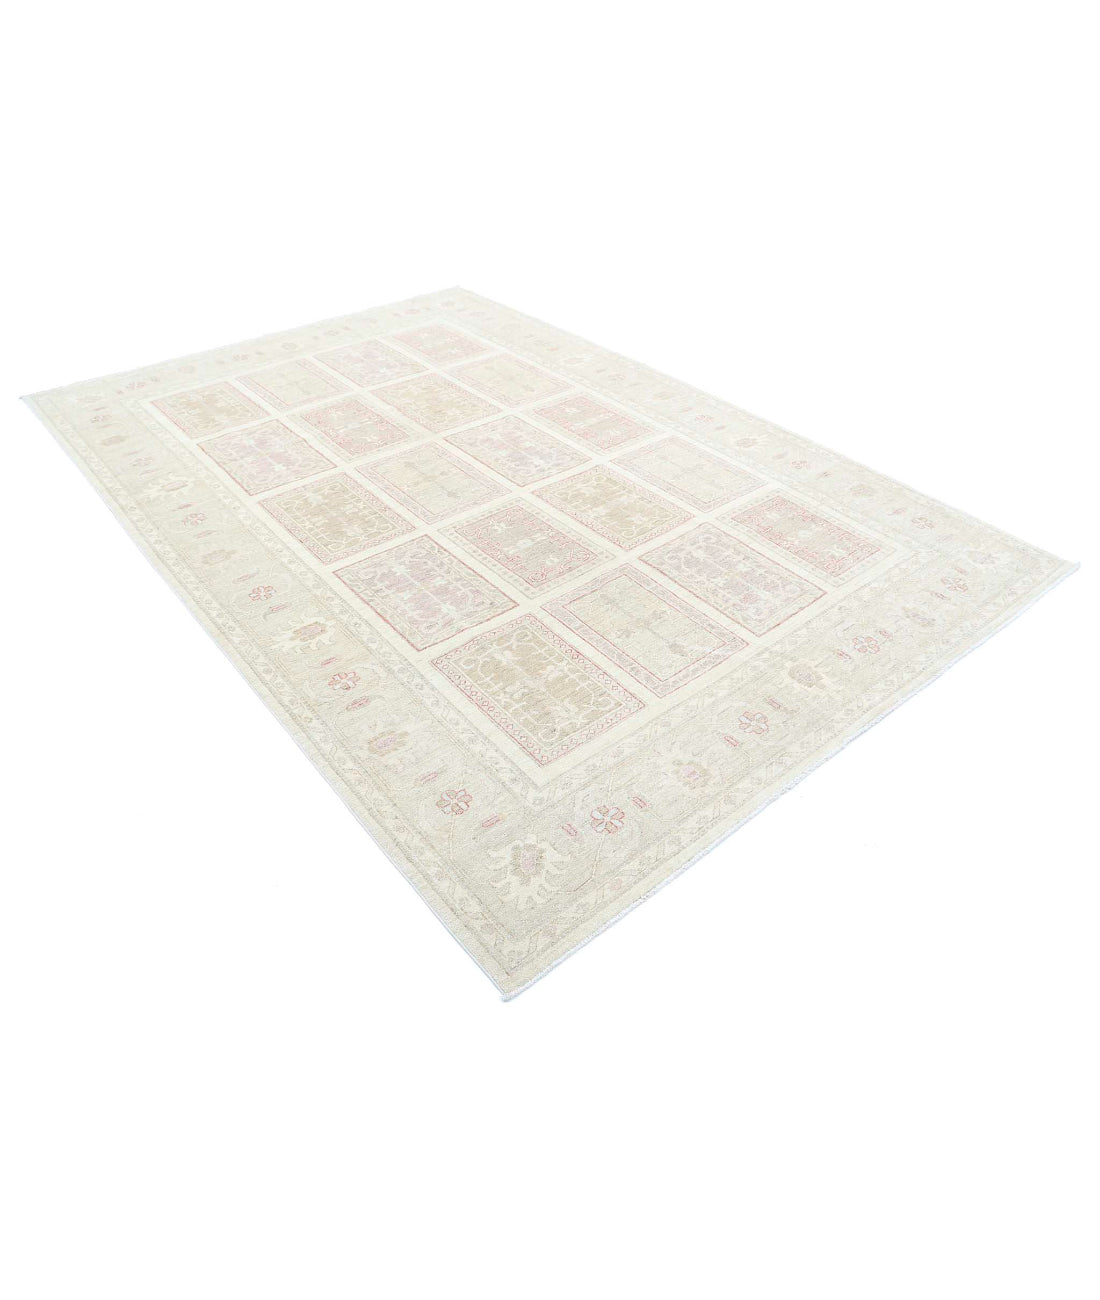 Hand Knotted Bakhtiari Wool Rug - 6'7'' x 9'8'' 6'7'' x 9'8'' (198 X 290) / Ivory / Taupe